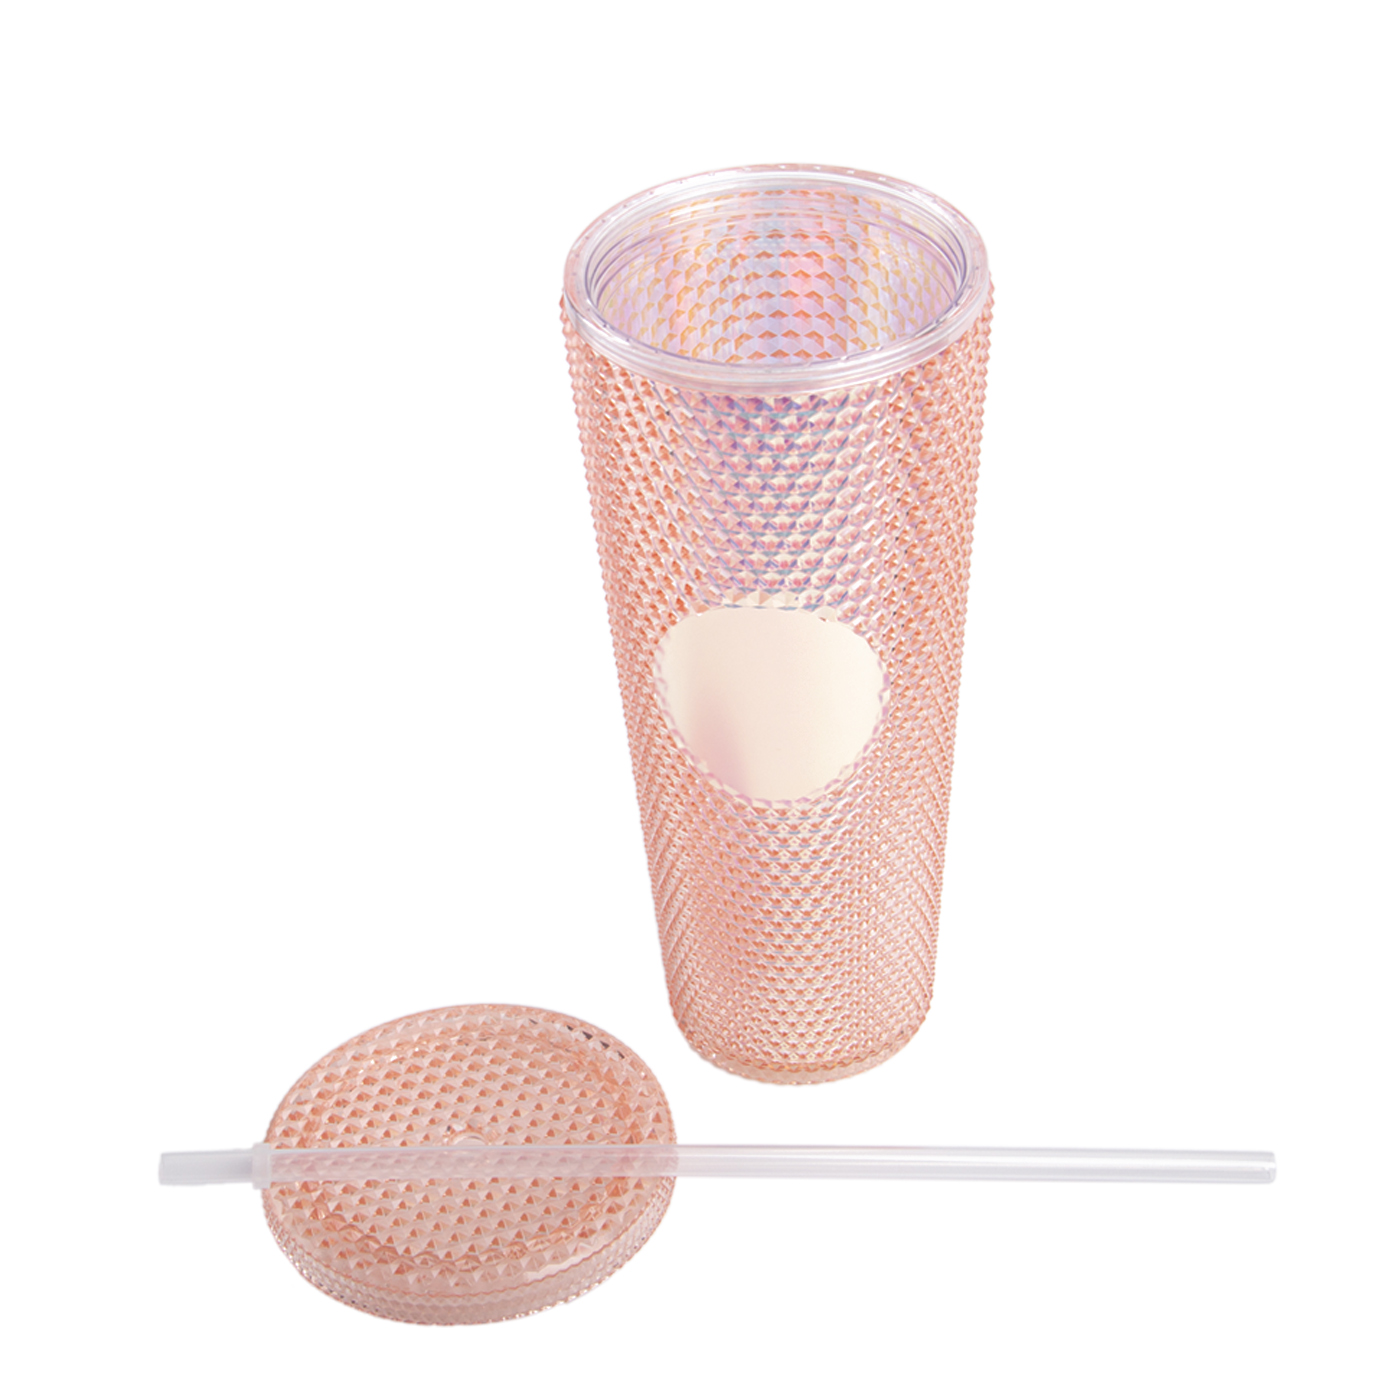 Studded Tumbler With Straw3